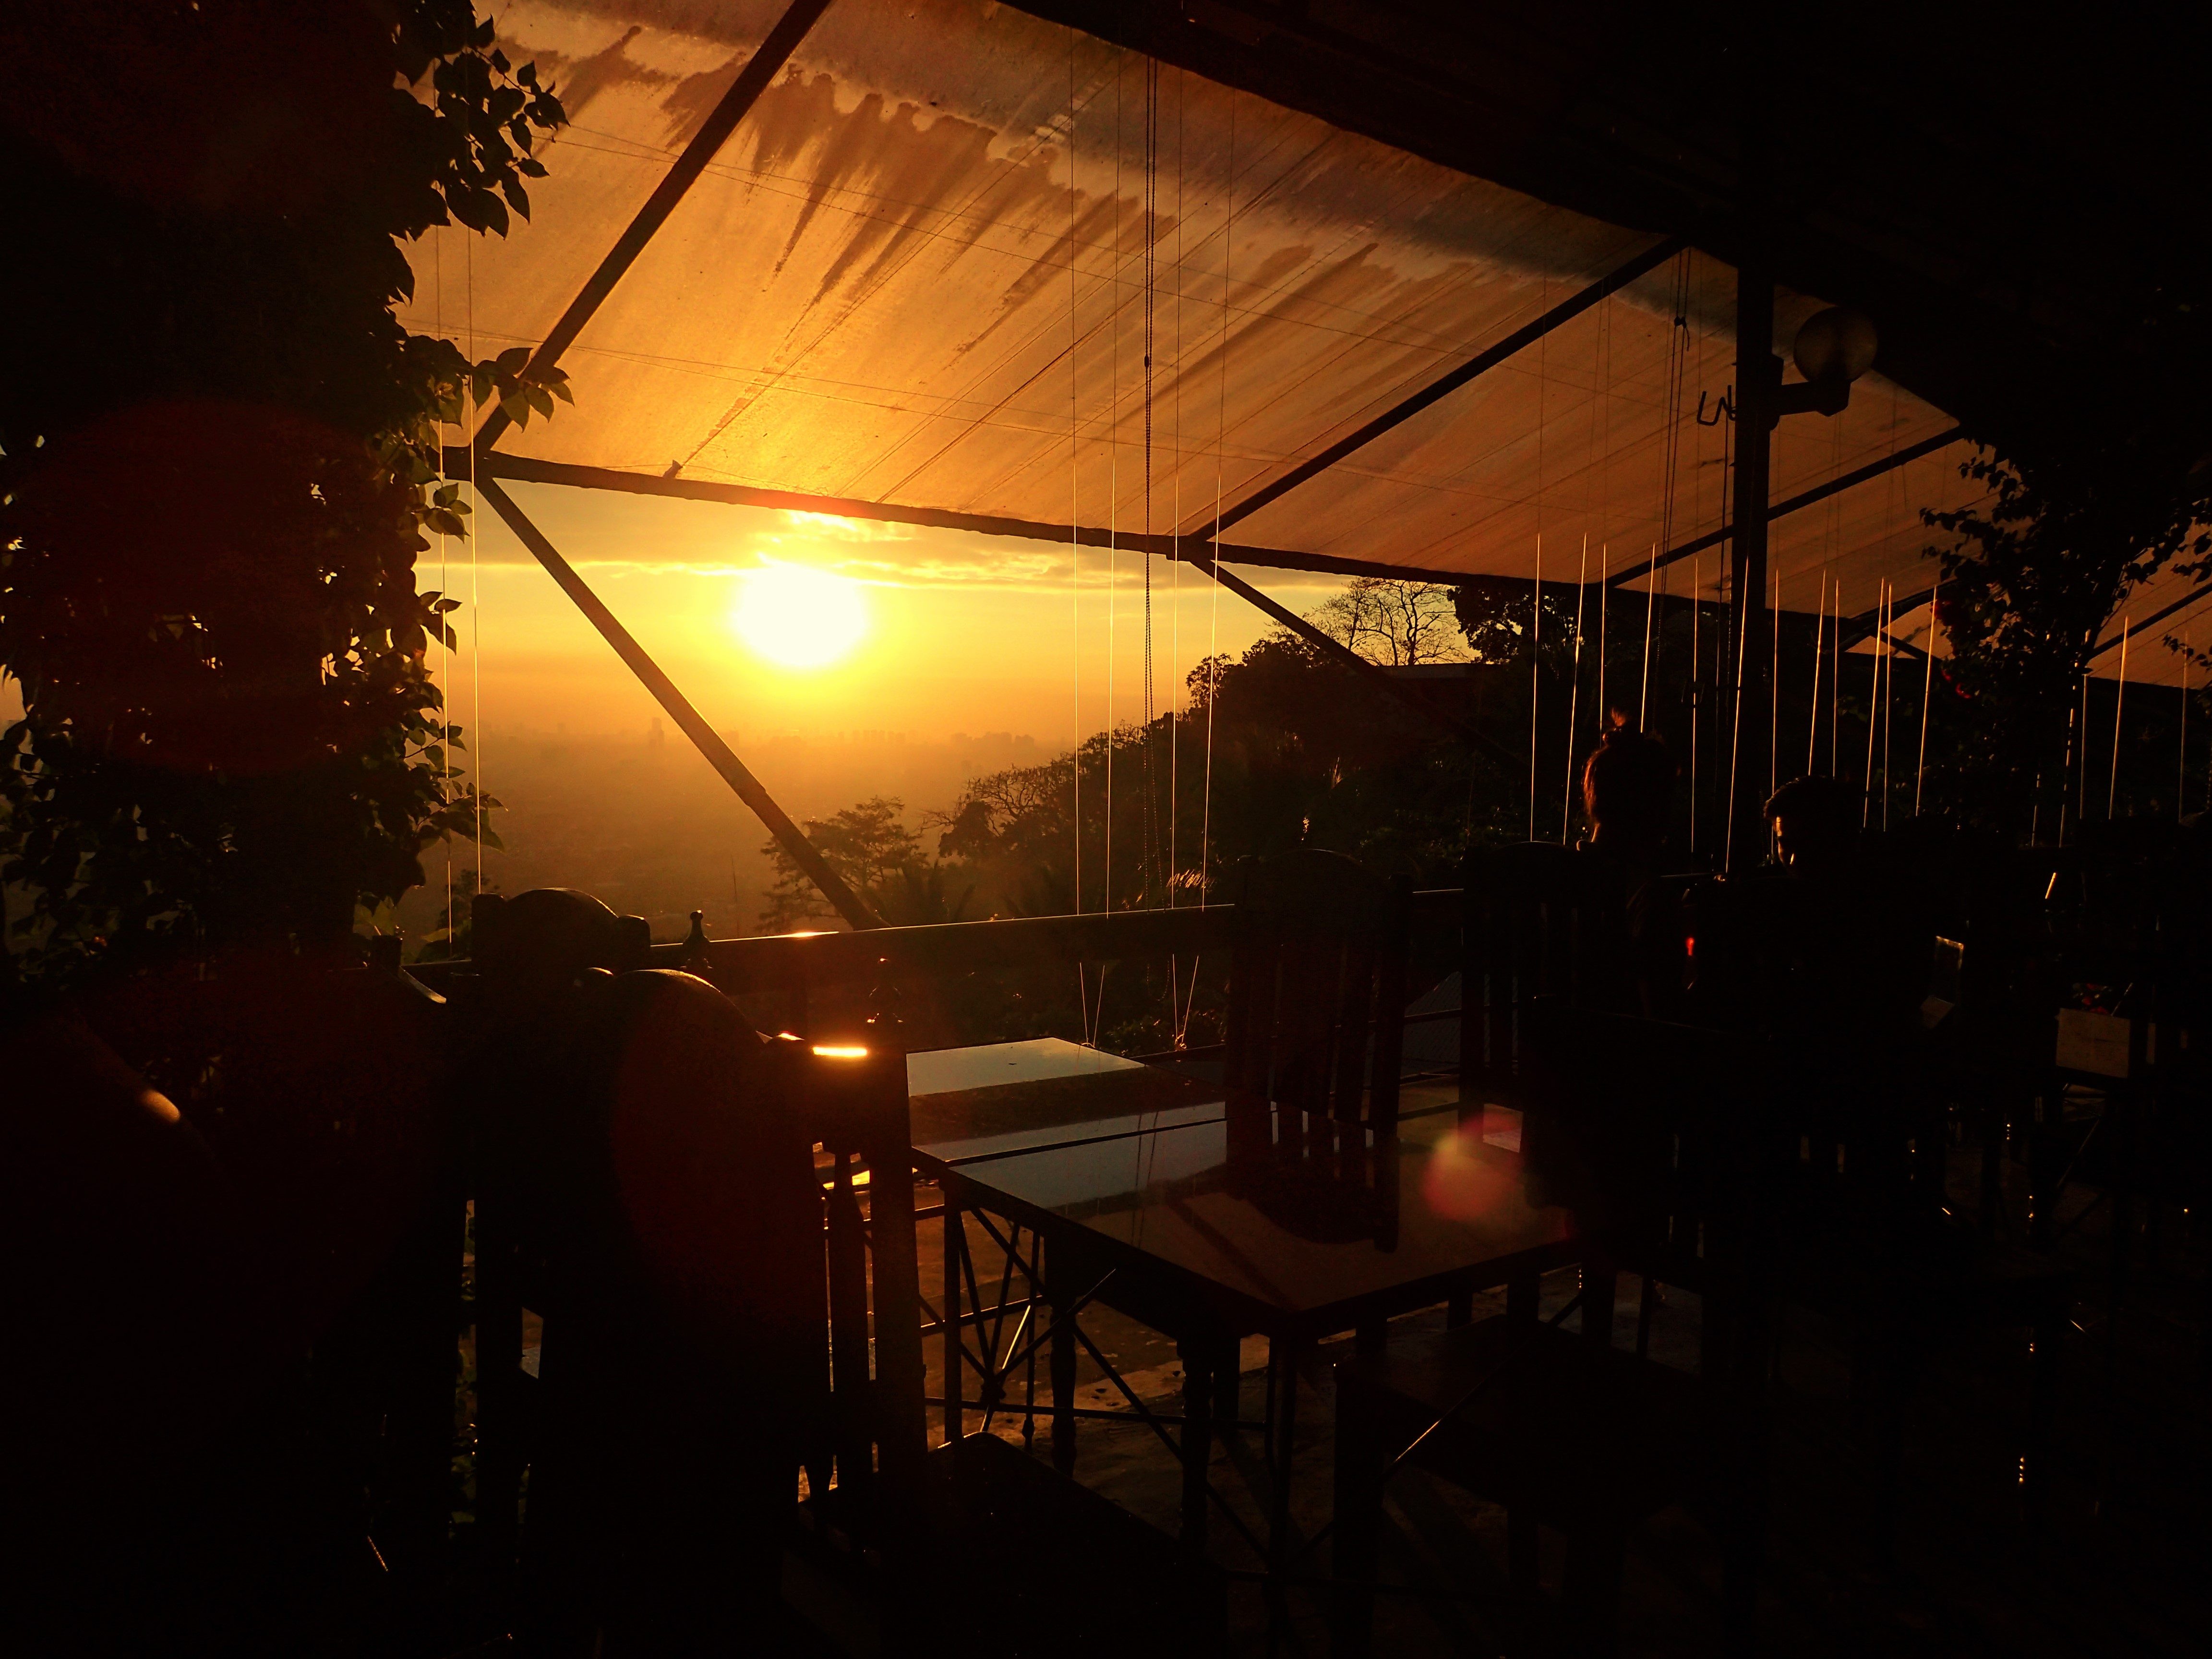 CHILLING. Cloud 9 is a perfect spot to watch the sunset over Metro Manilaâs skyline. 